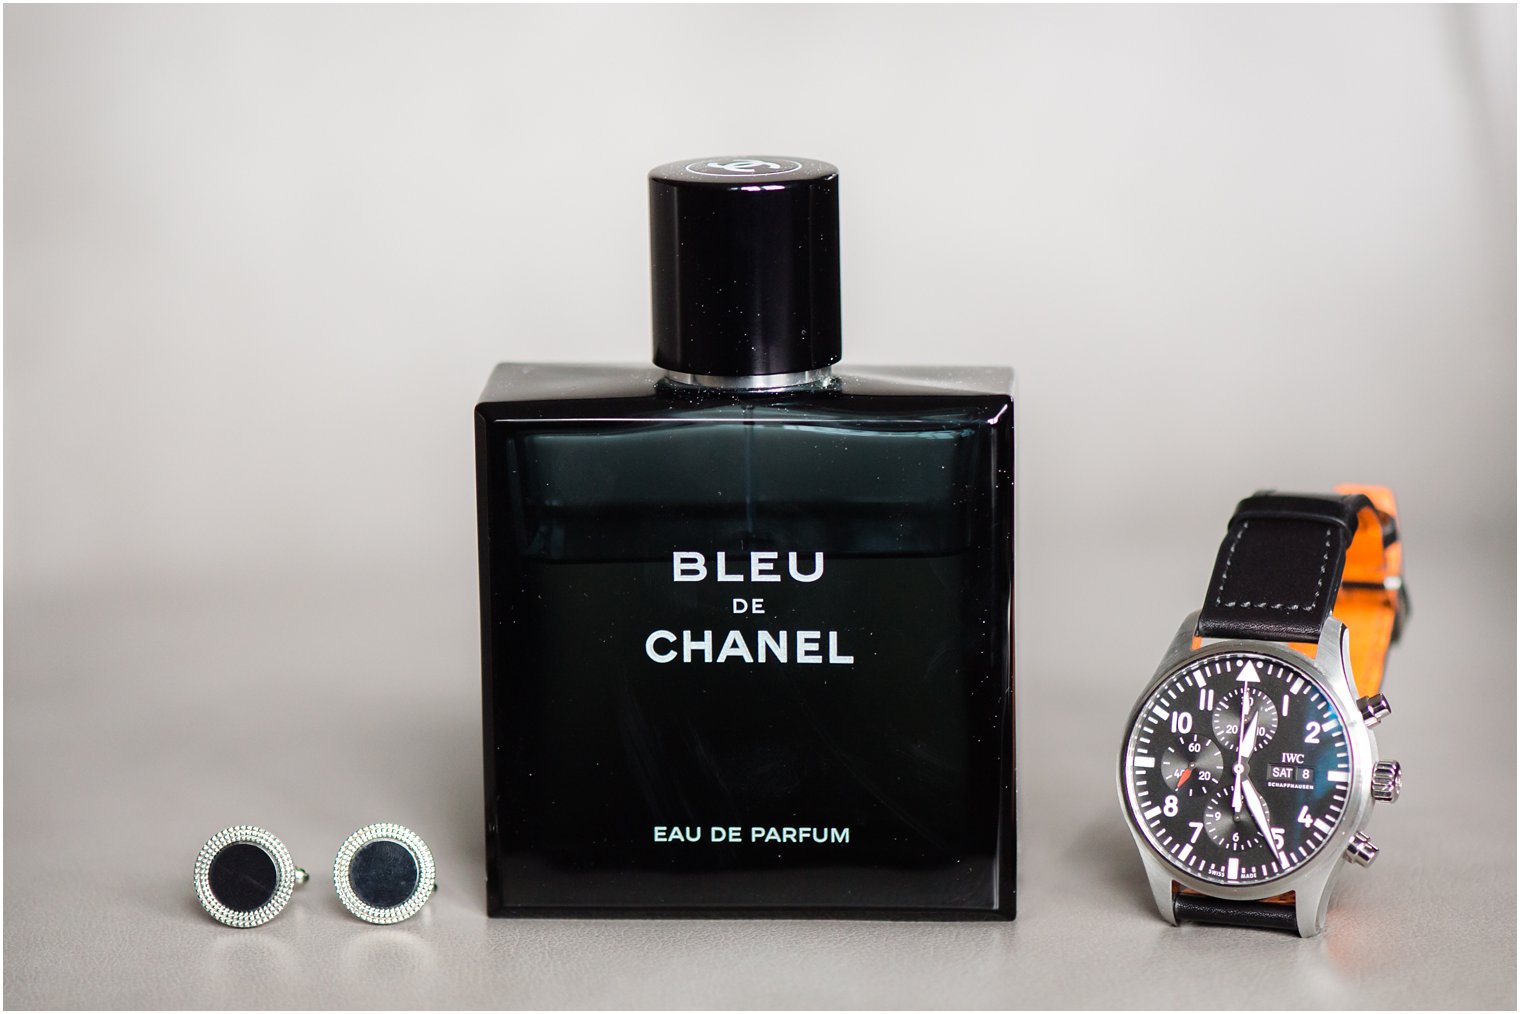 Chanel cologne for groom before Princeton wedding day photographed by Idalia Photography